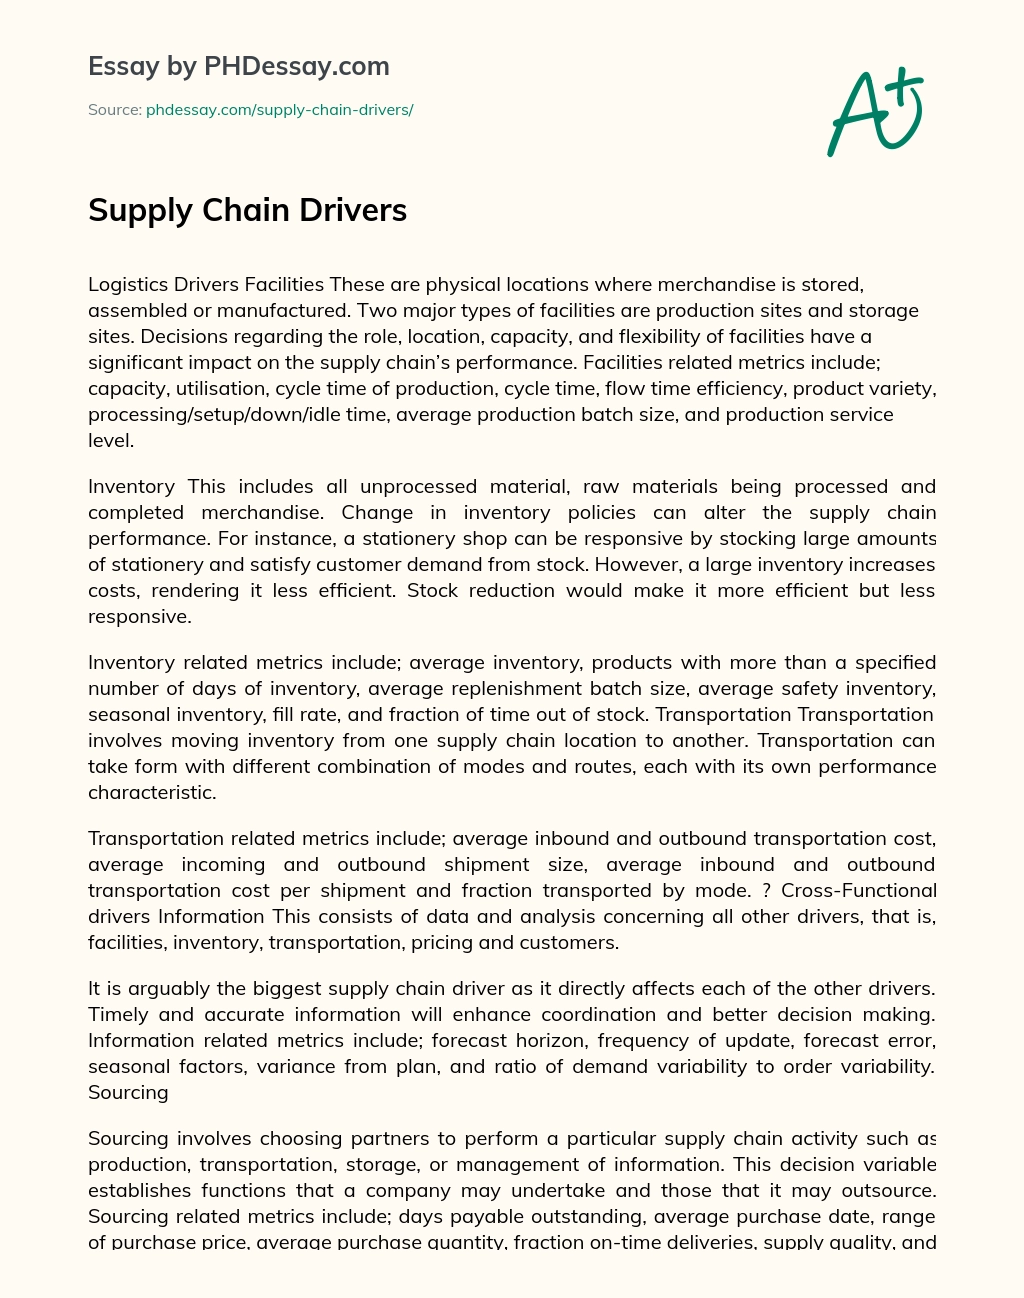 Supply Chain Drivers essay